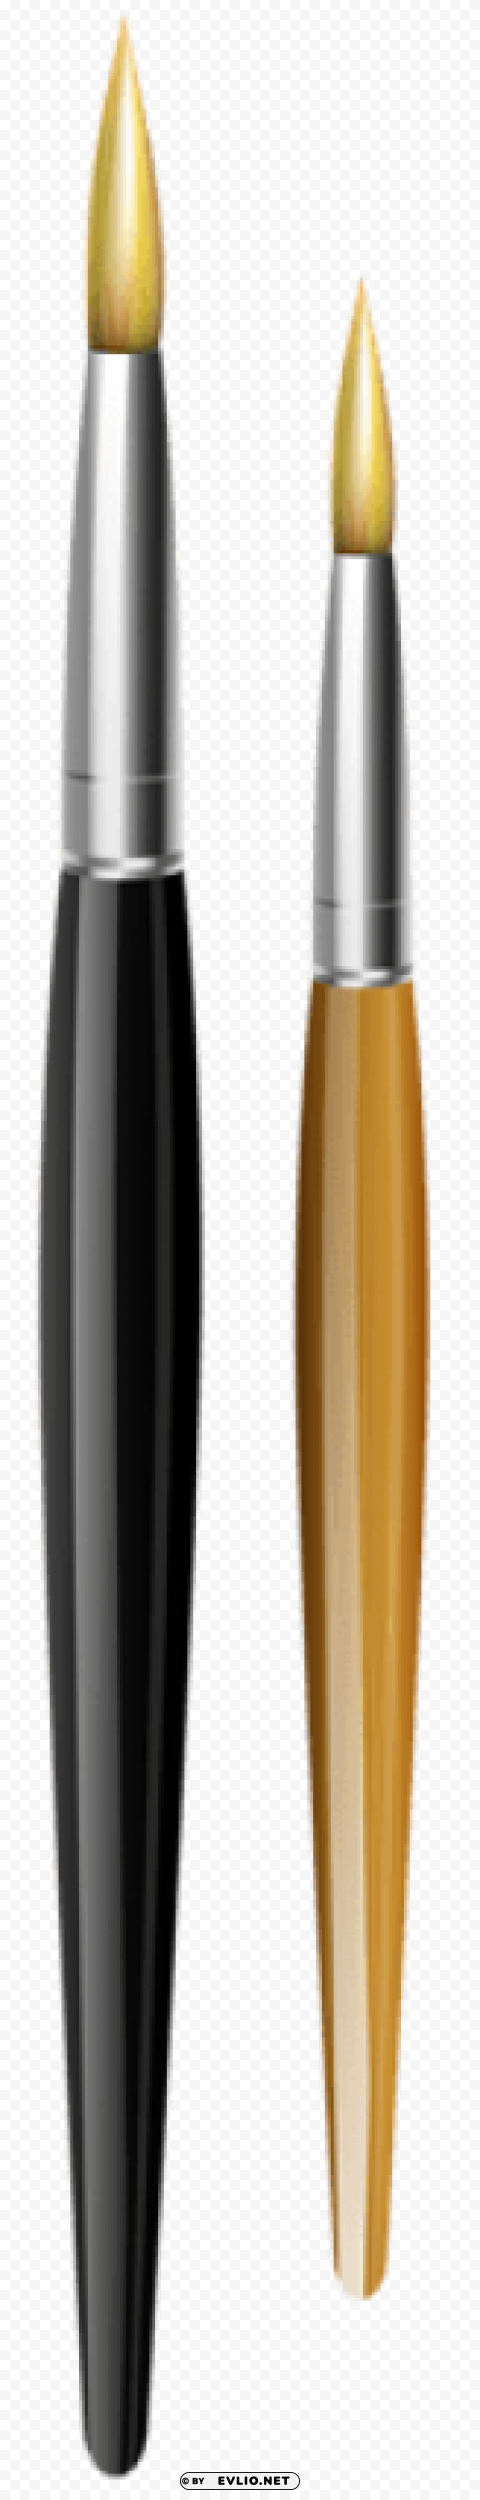 paint brushes PNG for personal use